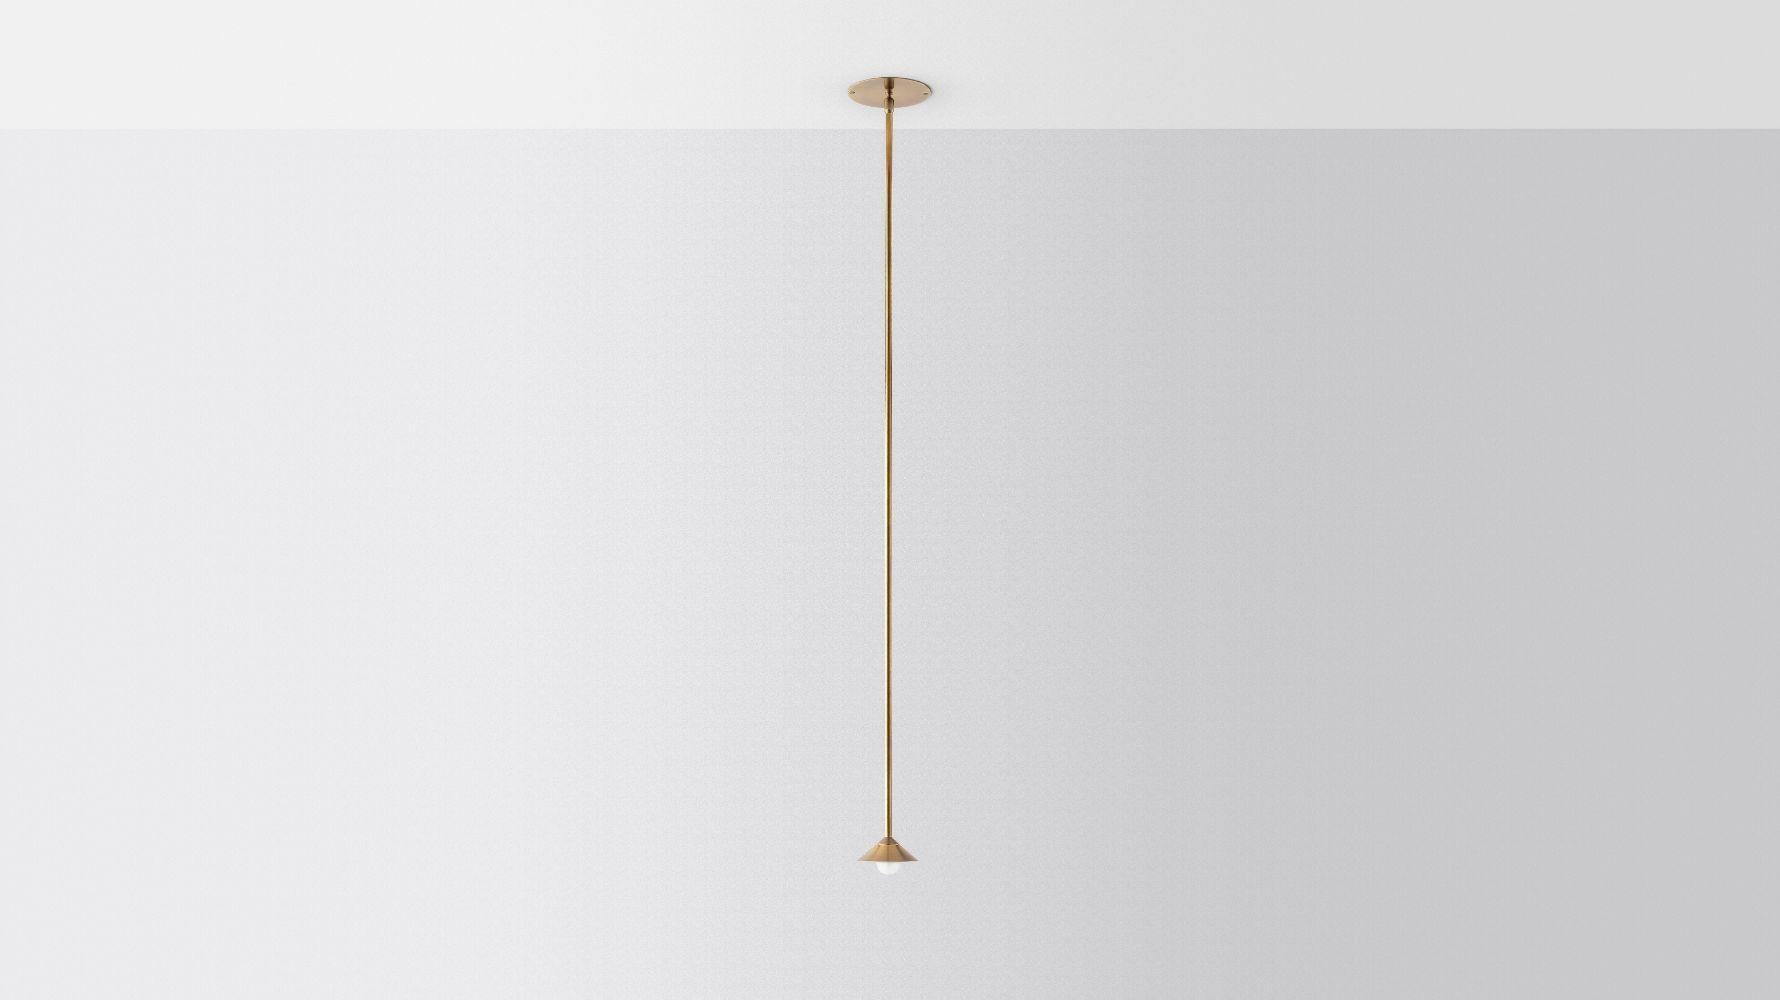 Baby drop by Volker Haug
Pyramid scheme series
Dimensions: W 15, D 15, H 40 cm
Small pendant: ø 10 cm
Support: ø 15 cm
Suspension: Min 40 cm

Material: Brass
Finishes: Polished, brushed or bronzed brass, enamel or chrome-plated.
Custom